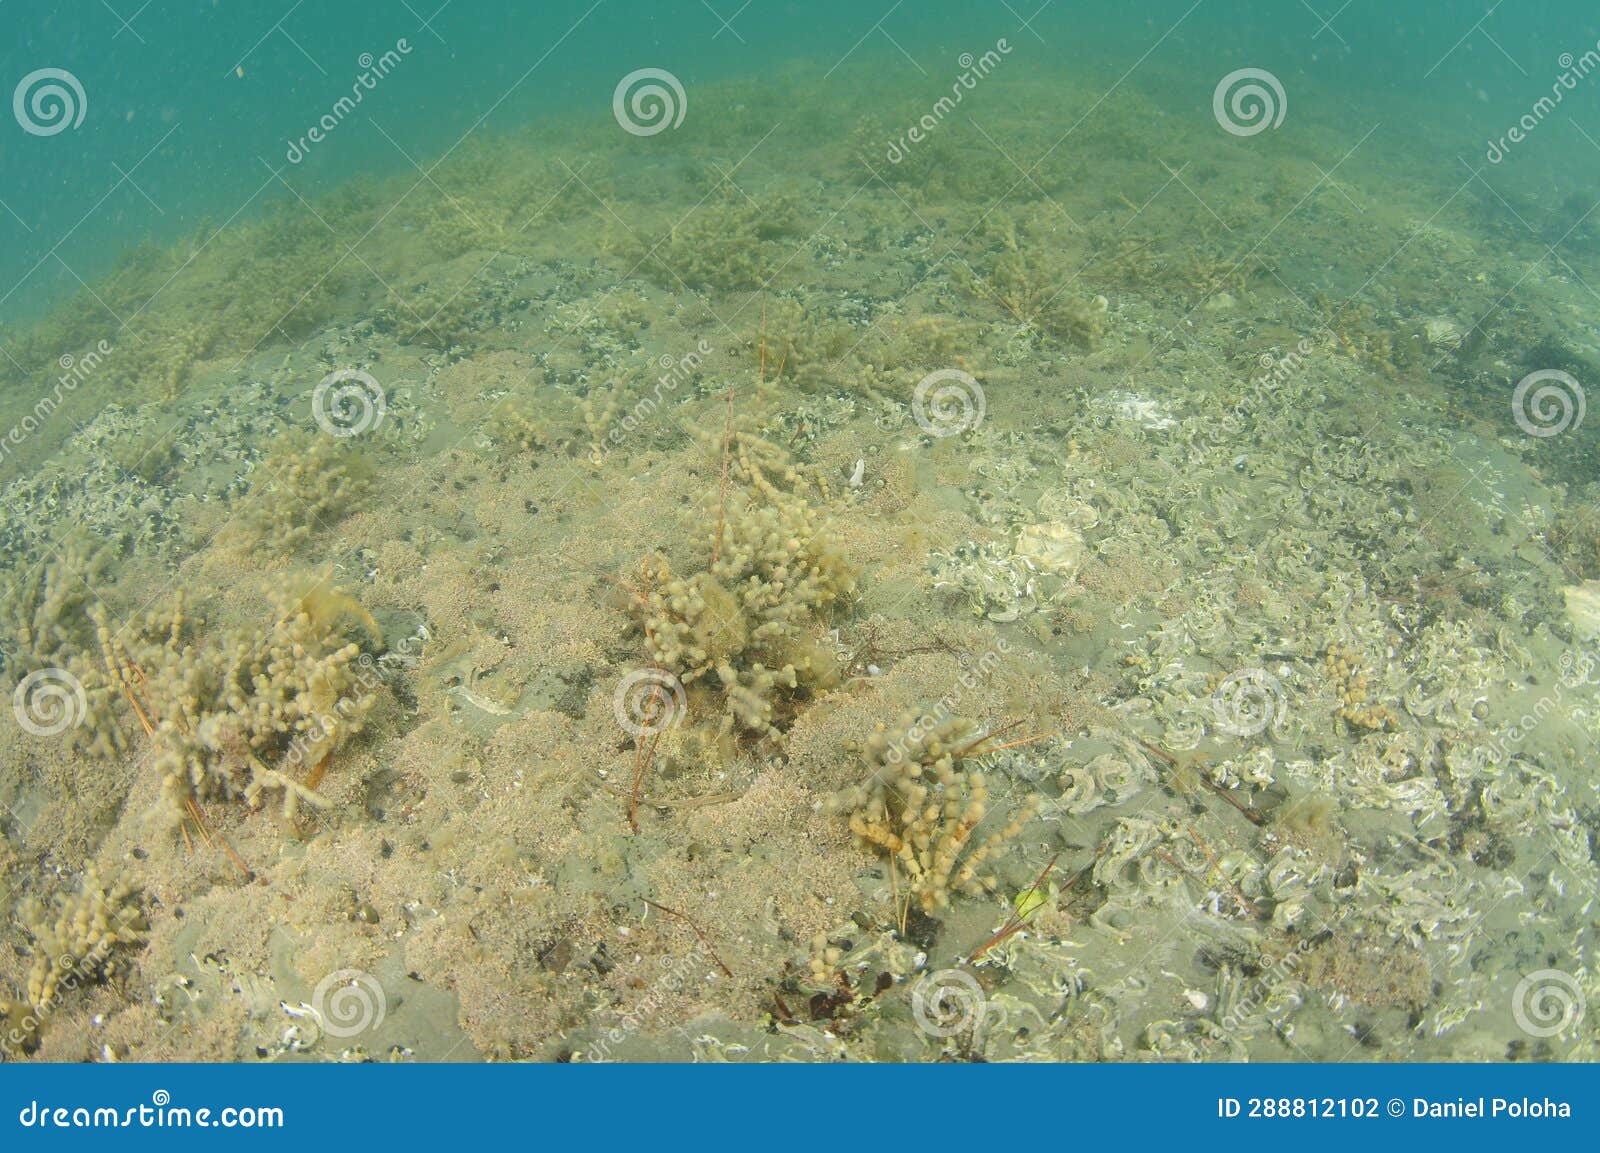 Flat Reef with Barnacles and Neptune S Necklace Stock Photo - Image of ...